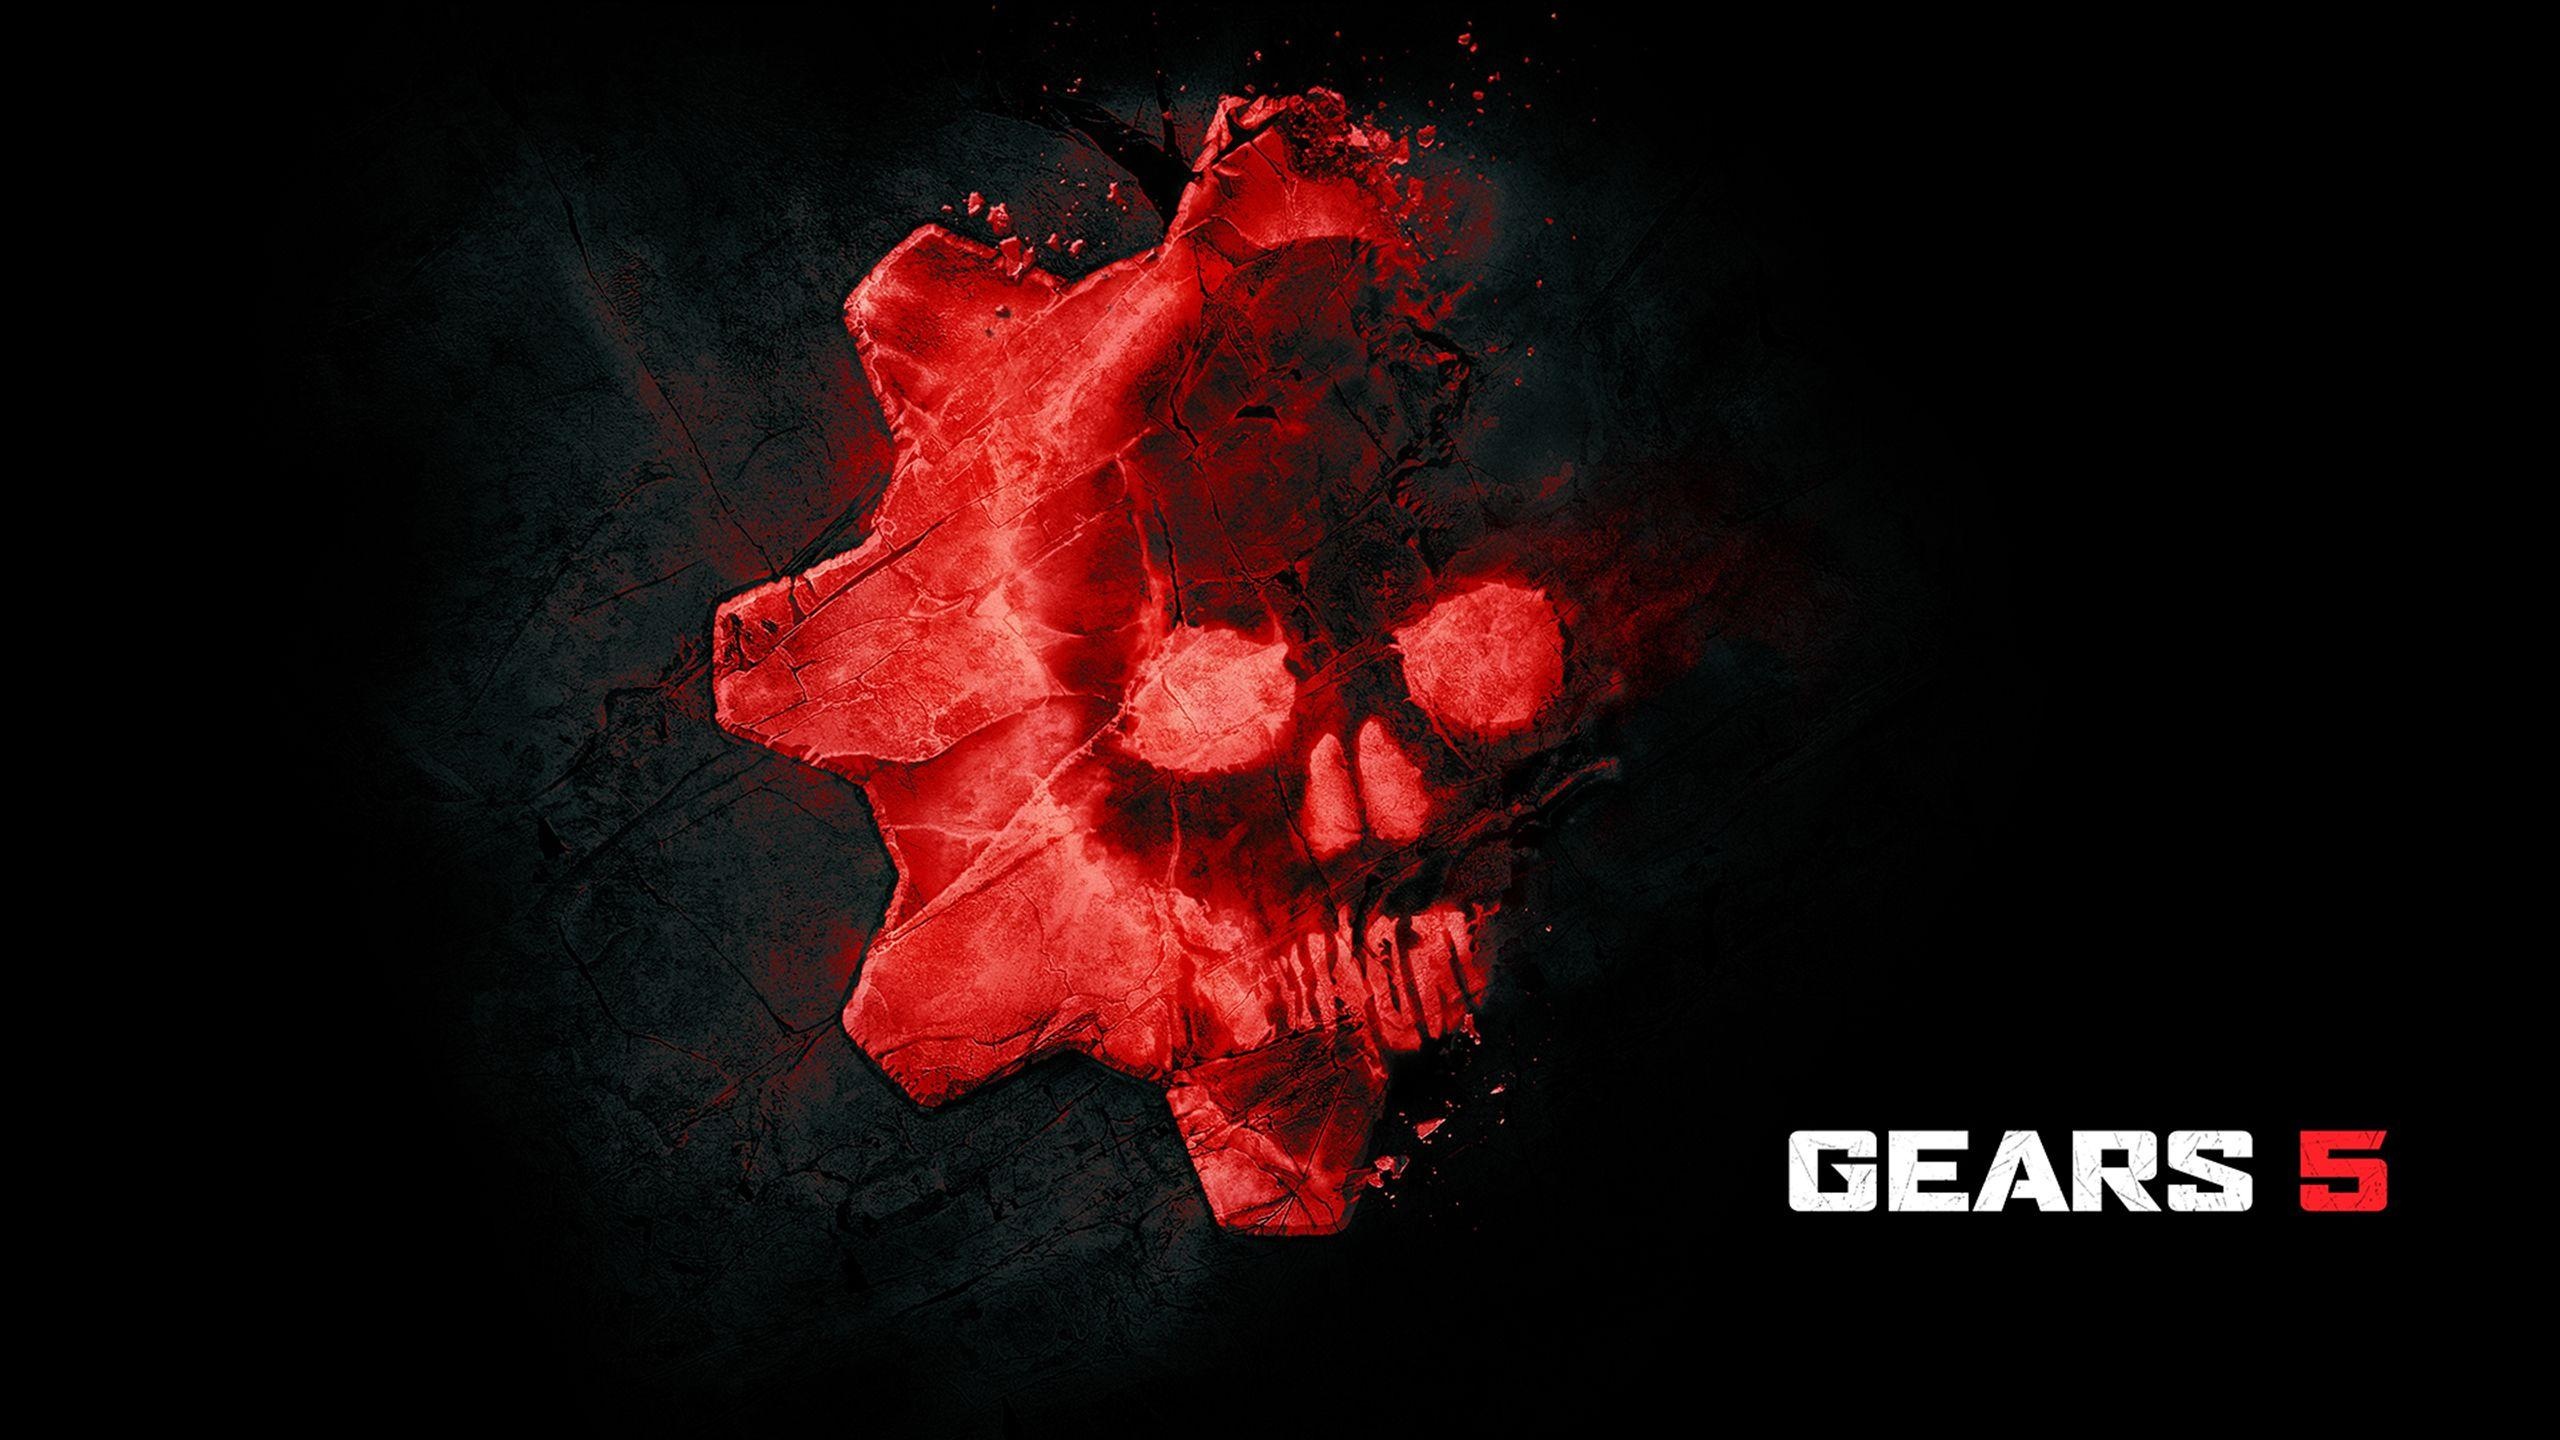 Gears 5 wallpapers, Visual variety, Gaming aesthetics, High quality imagery, 2560x1440 HD Desktop